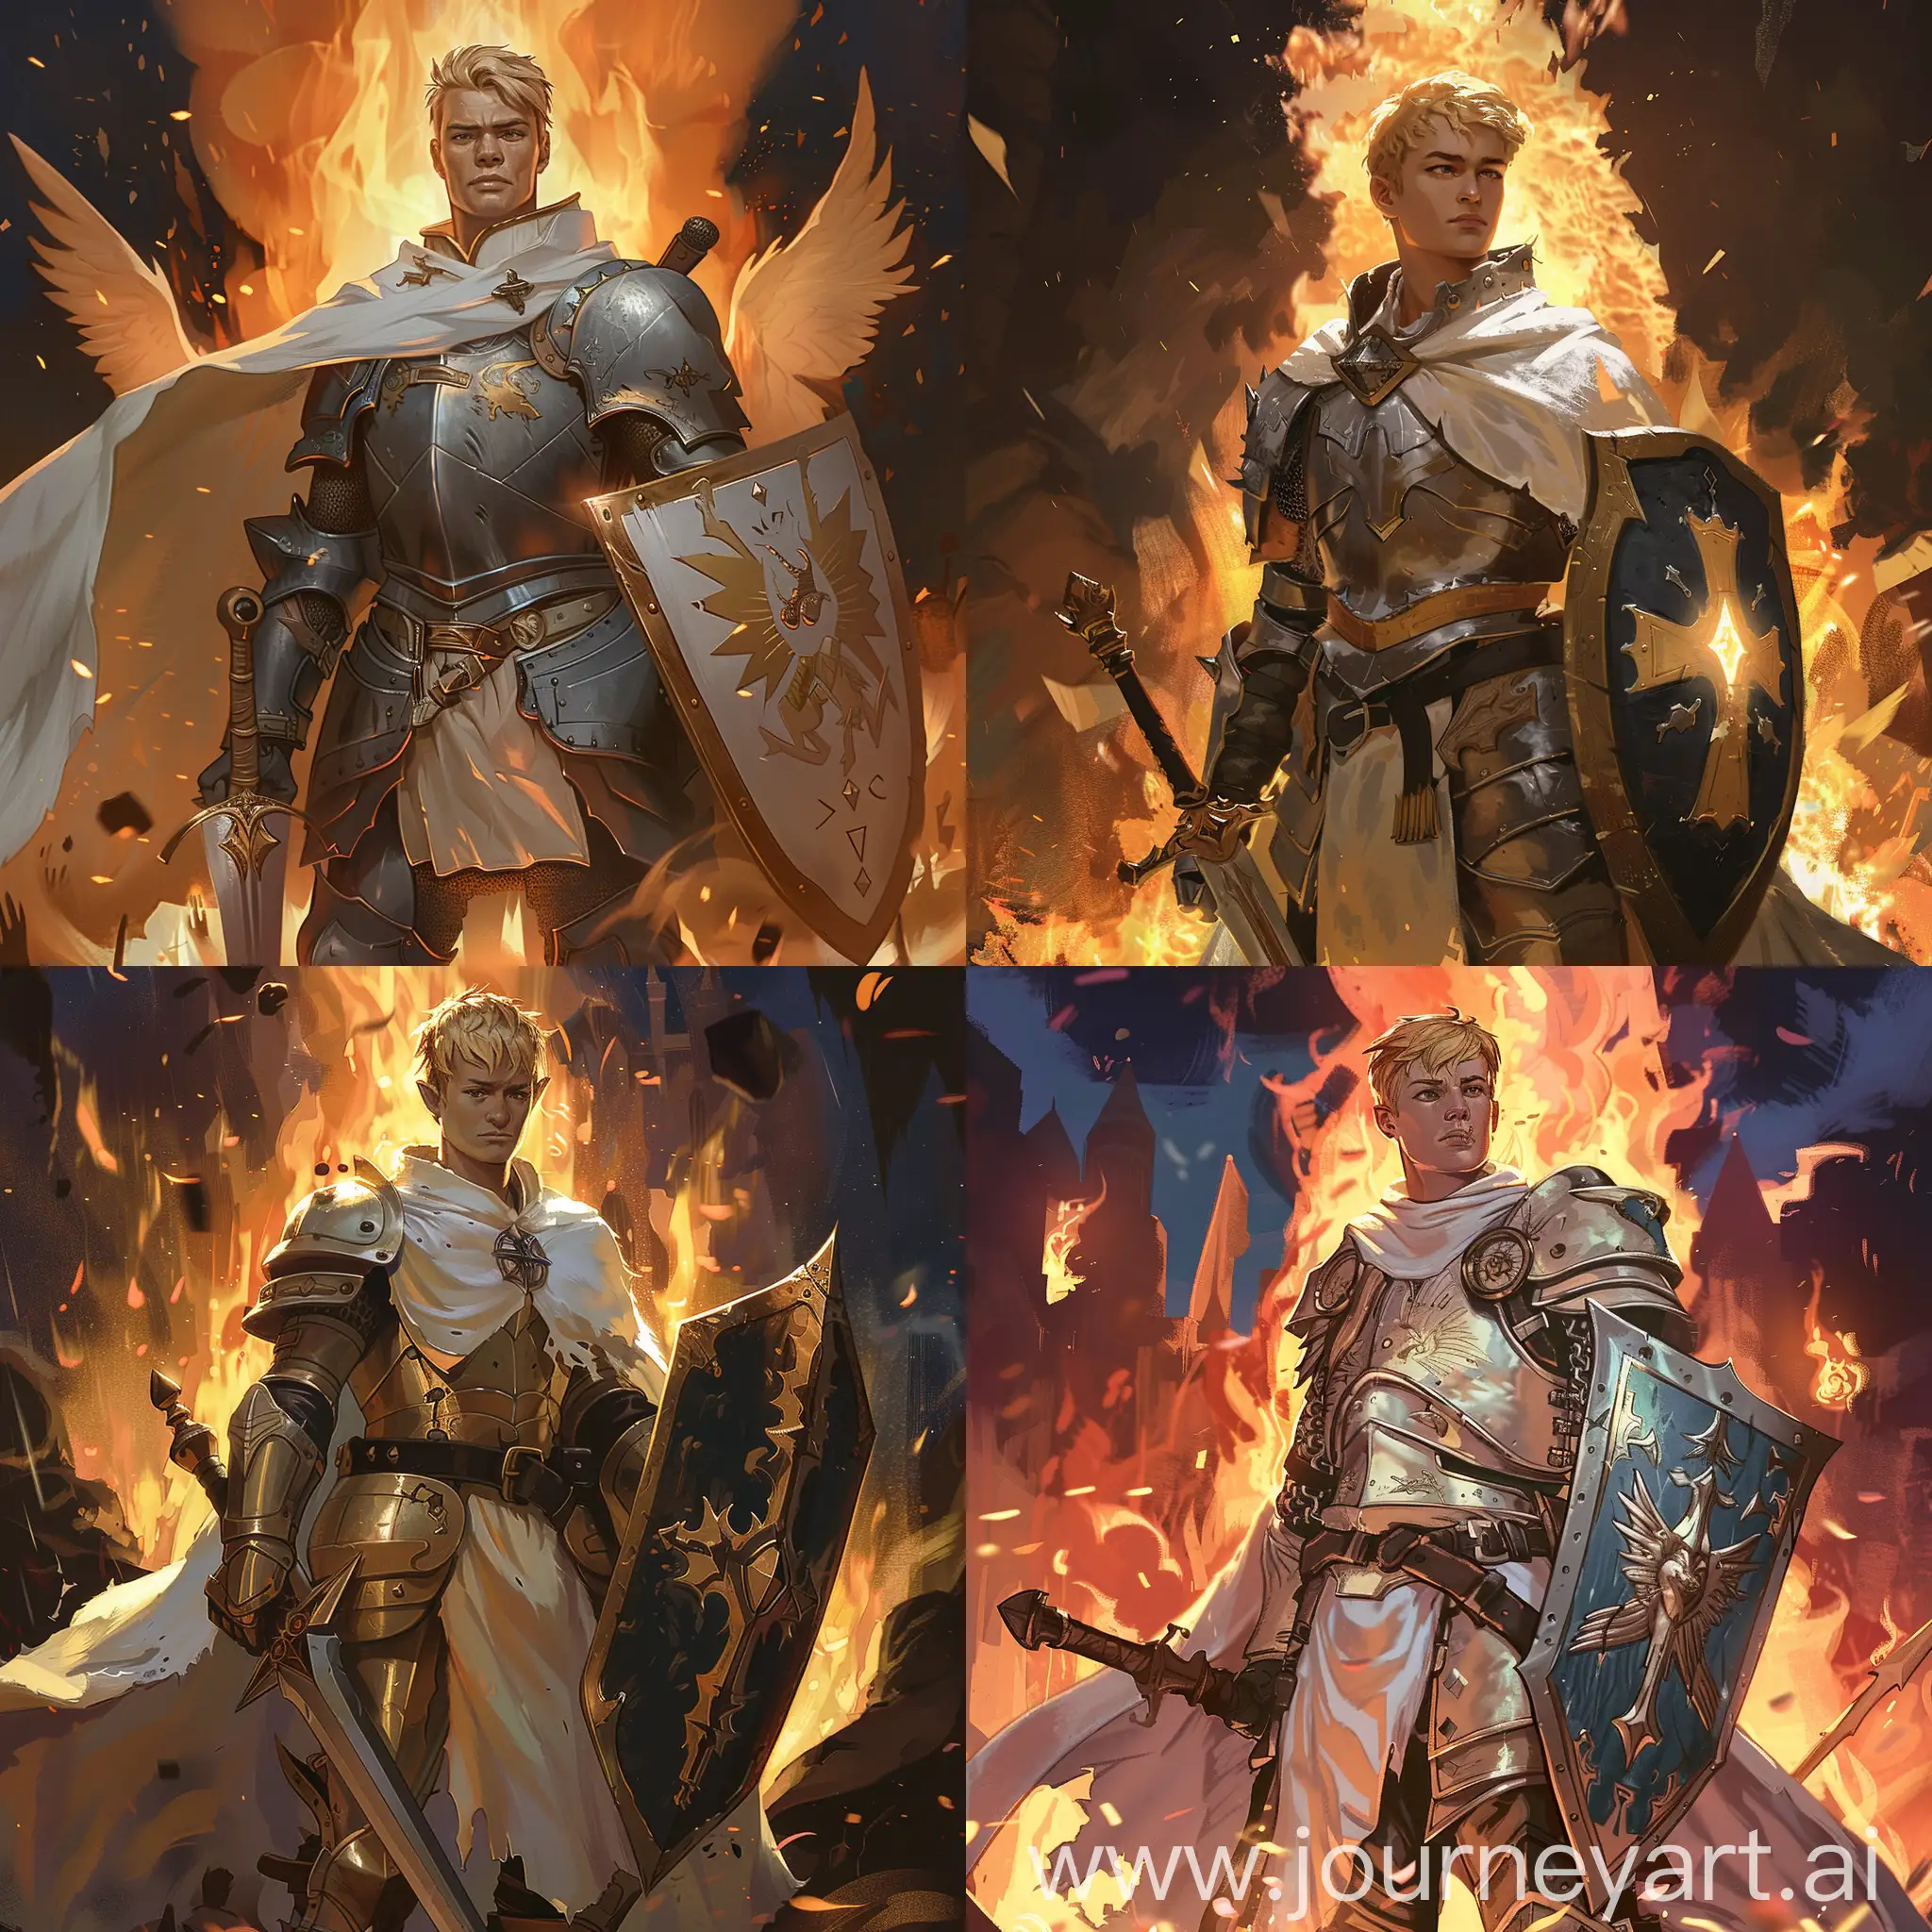 Young-Male-Human-Paladin-Knight-in-Armor-Amidst-Night-Fire